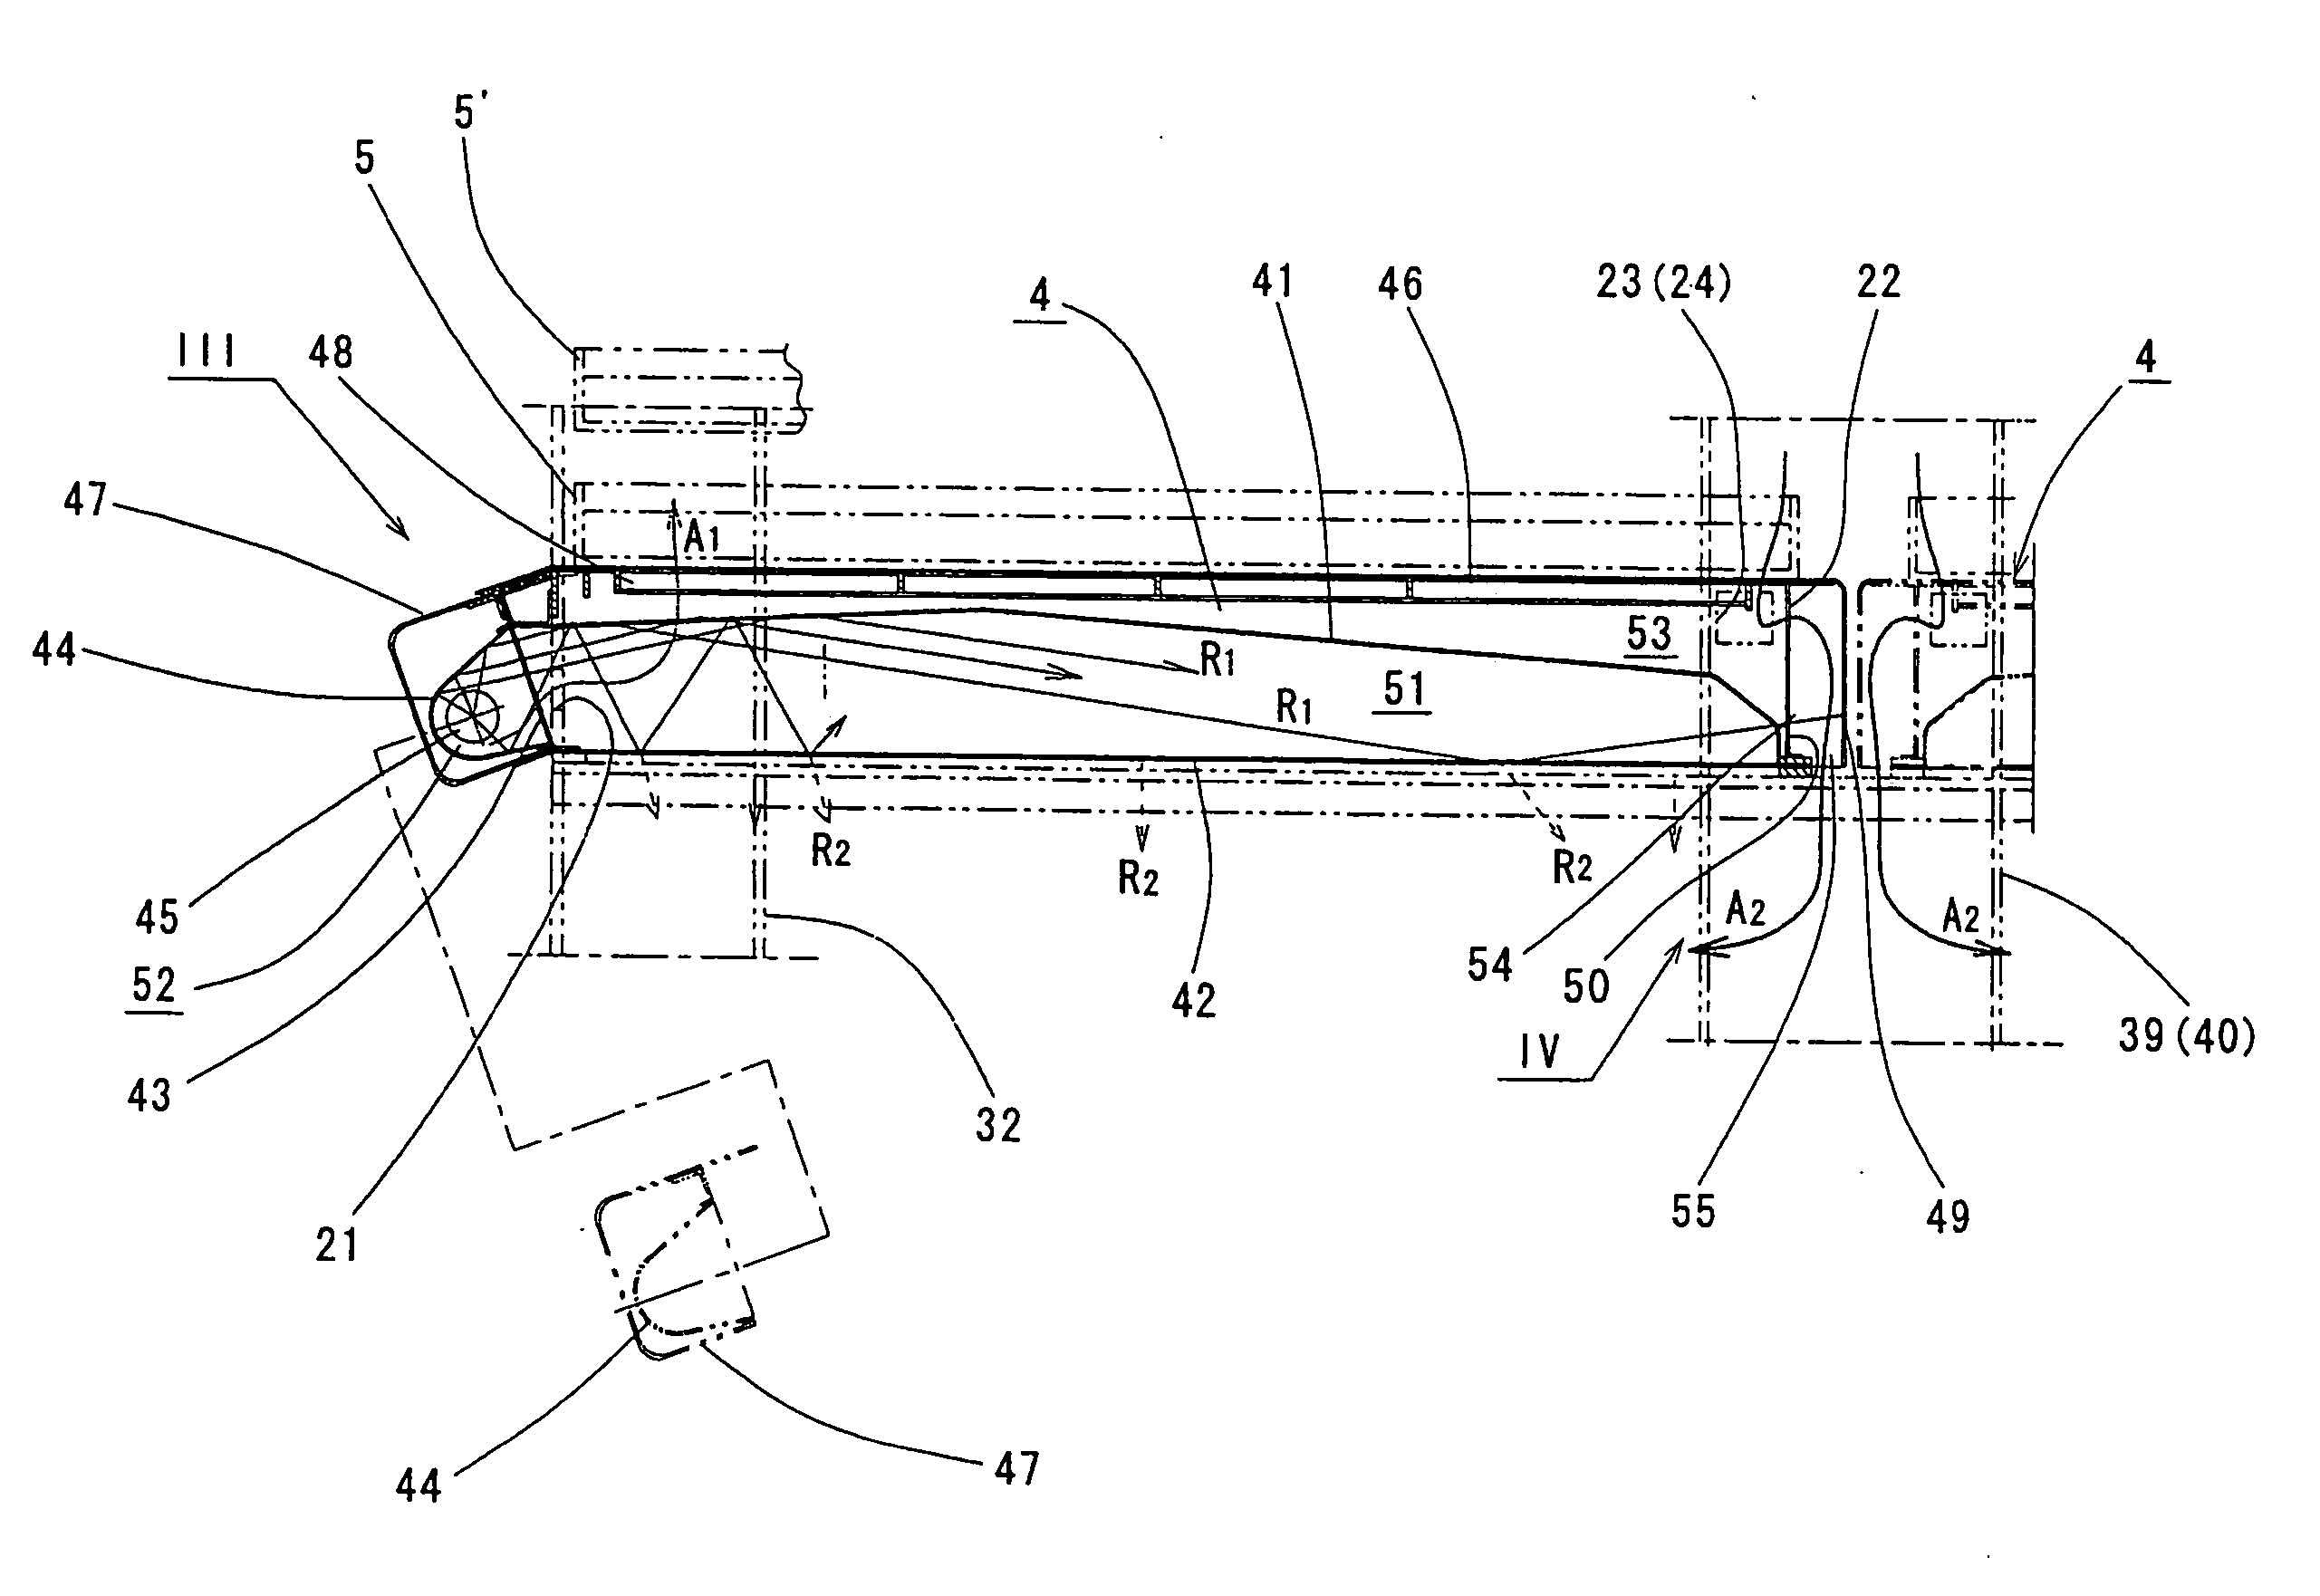 Illuminating Device and Plant Growth Apparatus Equipped With the Illuminating Device